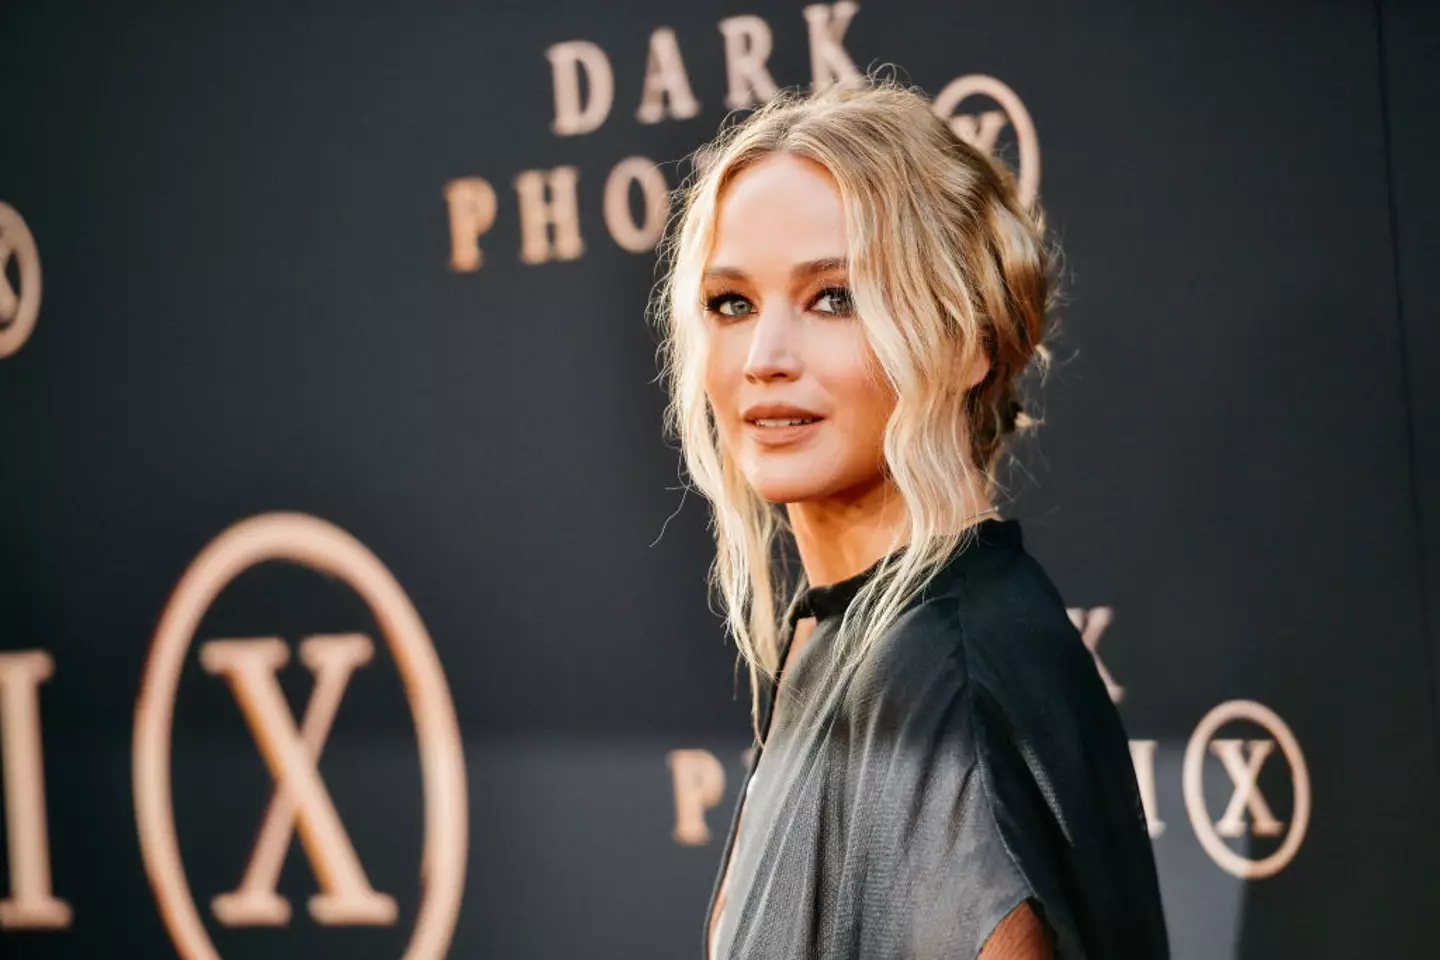 Jennifer Lawrence played the lead role in Darren Aronofsky's horror flick Mother!